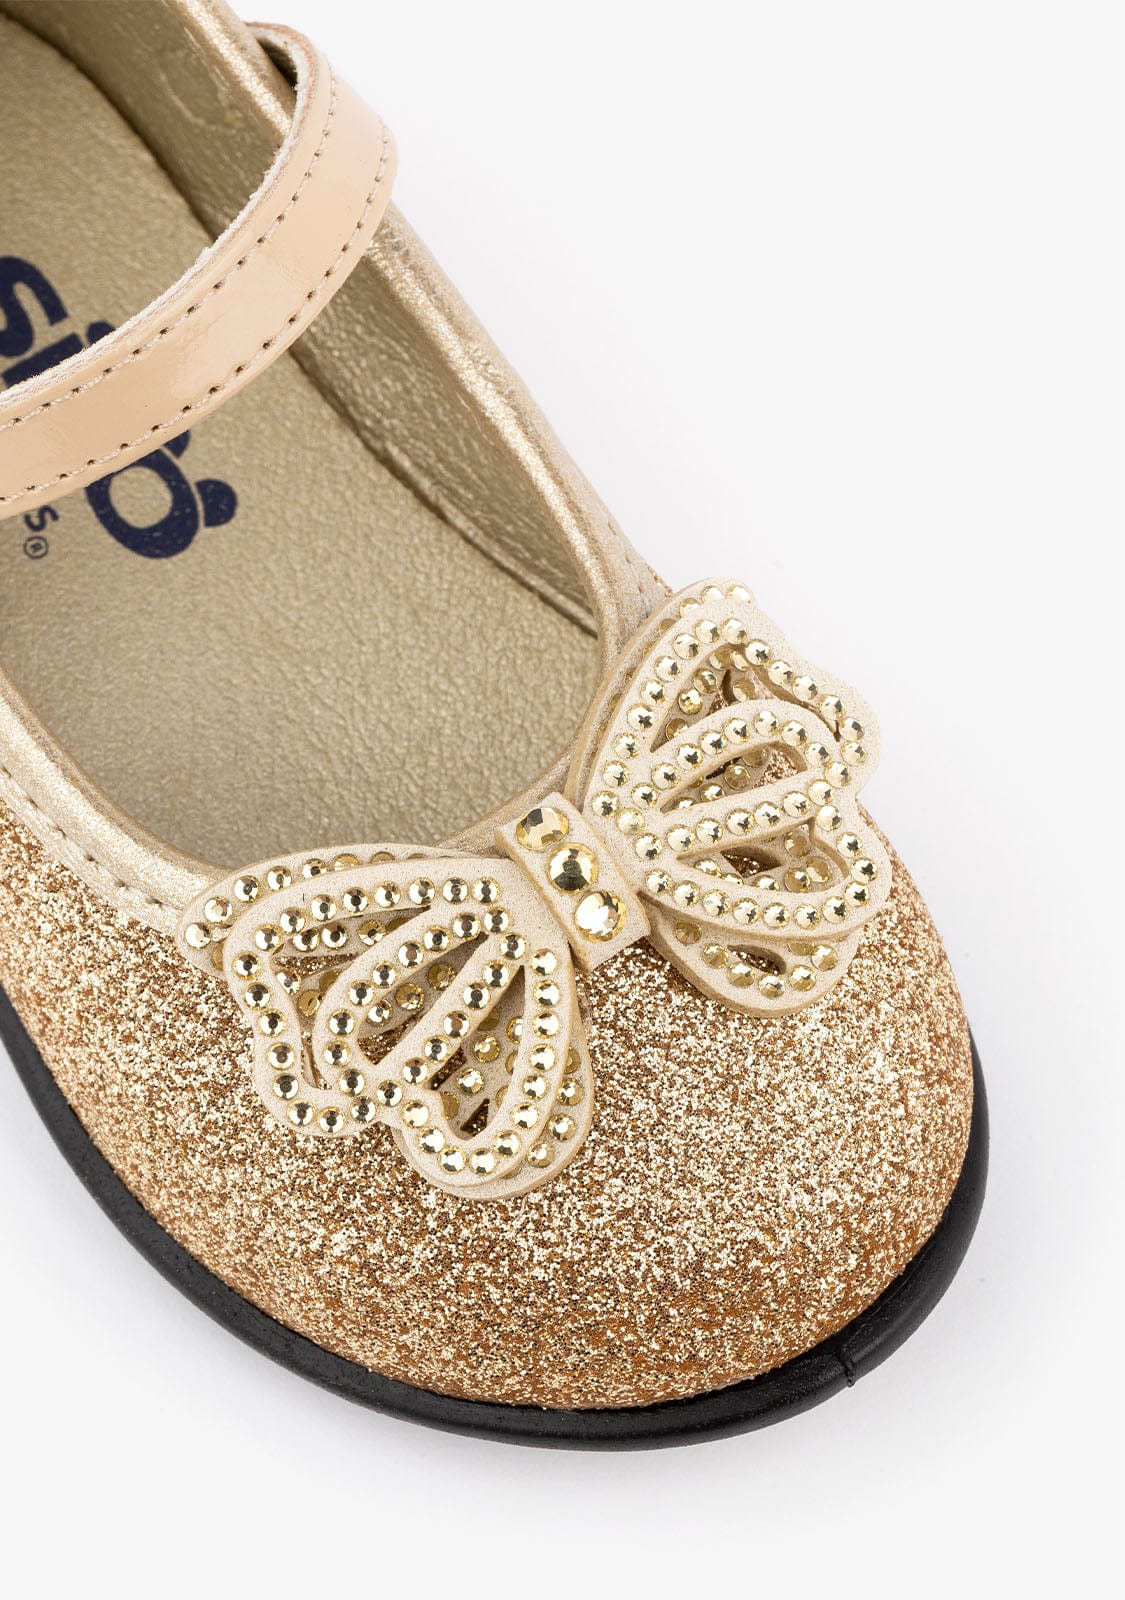 OSITO Shoes Baby's Platinum Glitter Ballerinas With Bow